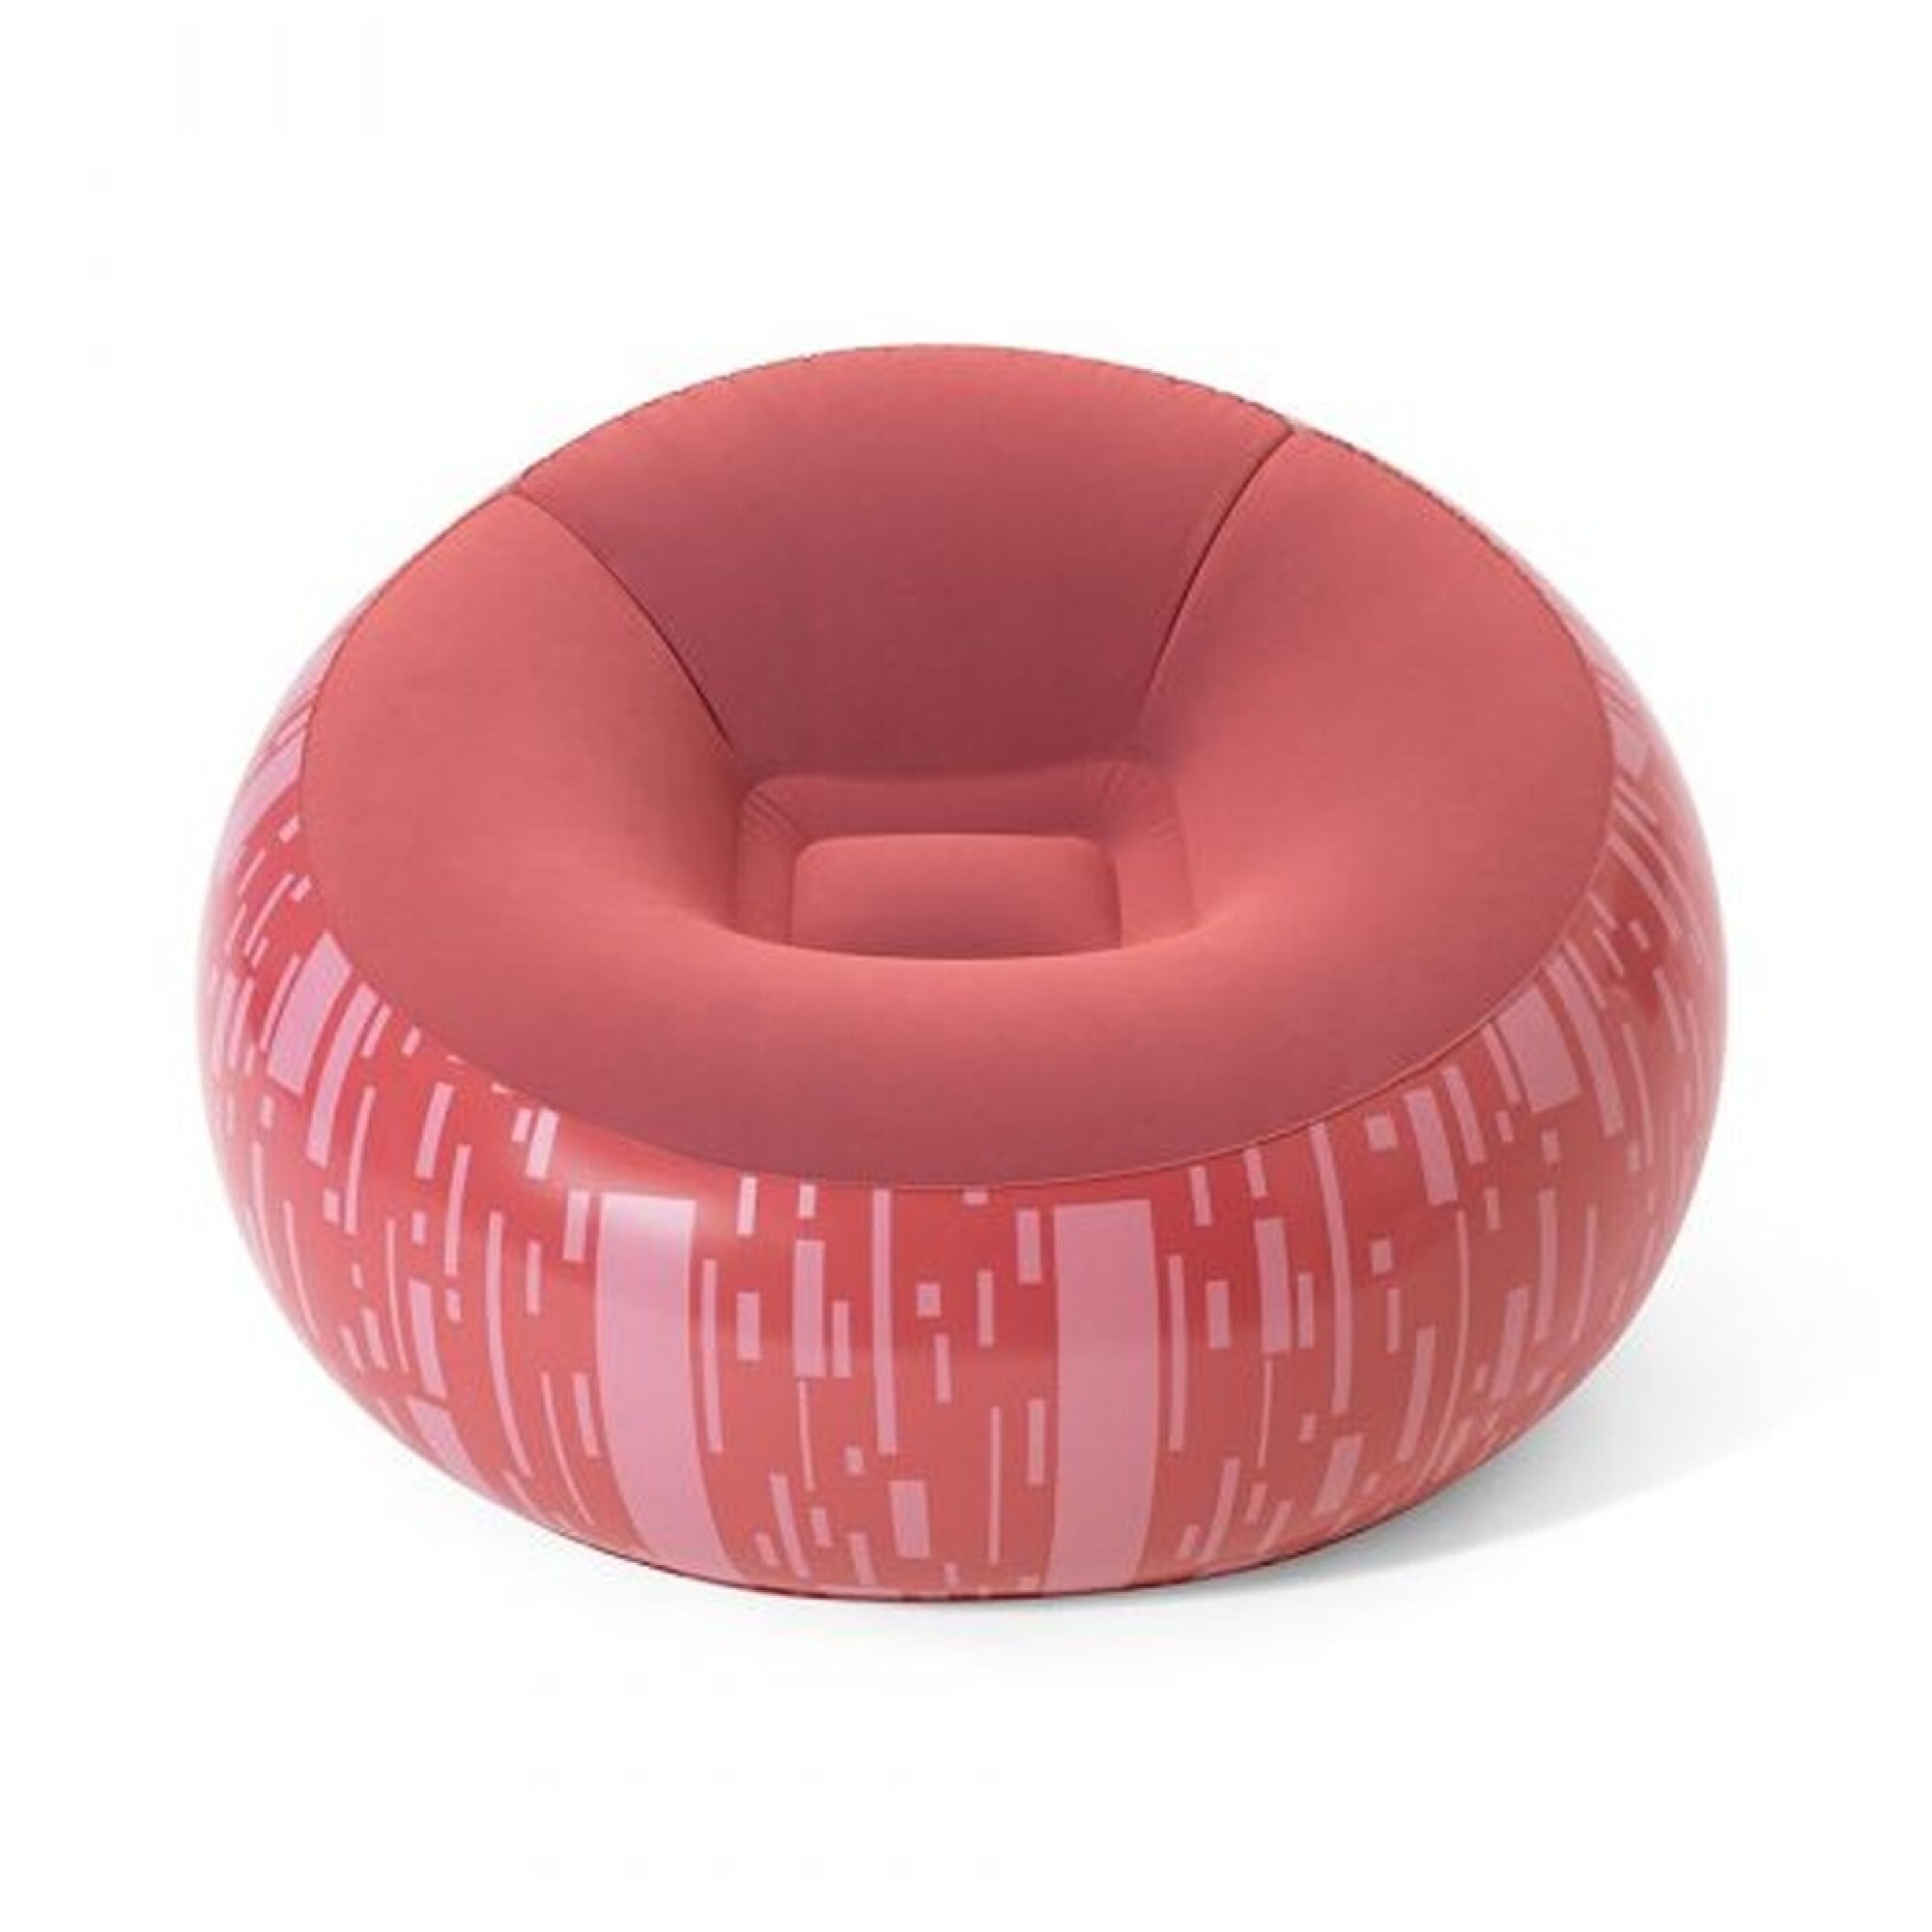 Comprá Puff Inflable Bestway Inflate A Chair 75075 - Envios a todo el  Paraguay